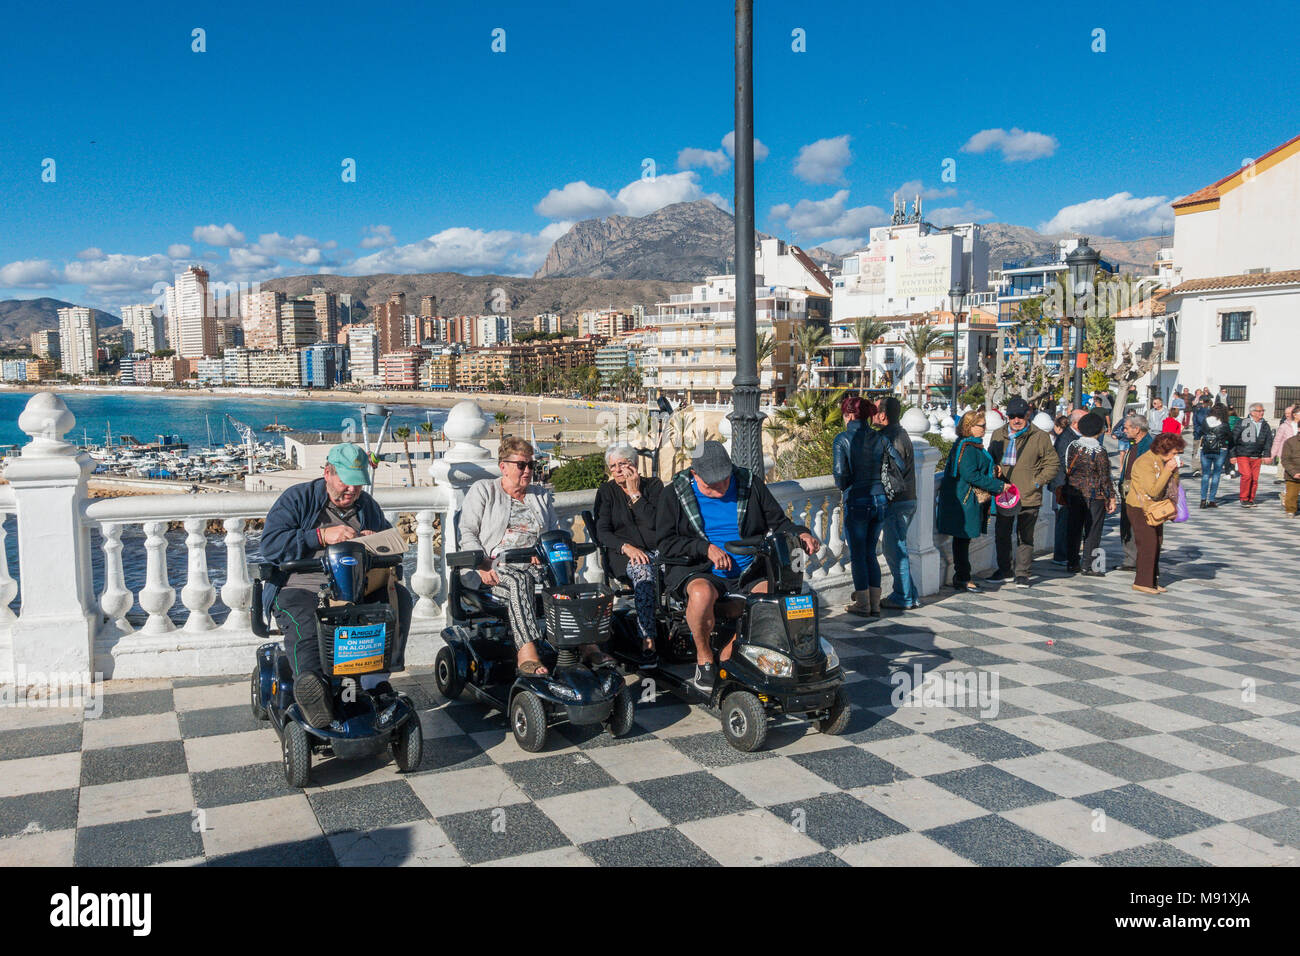 Group of elderly people on mobility scooters in Benidorm, Spain Stock Photo